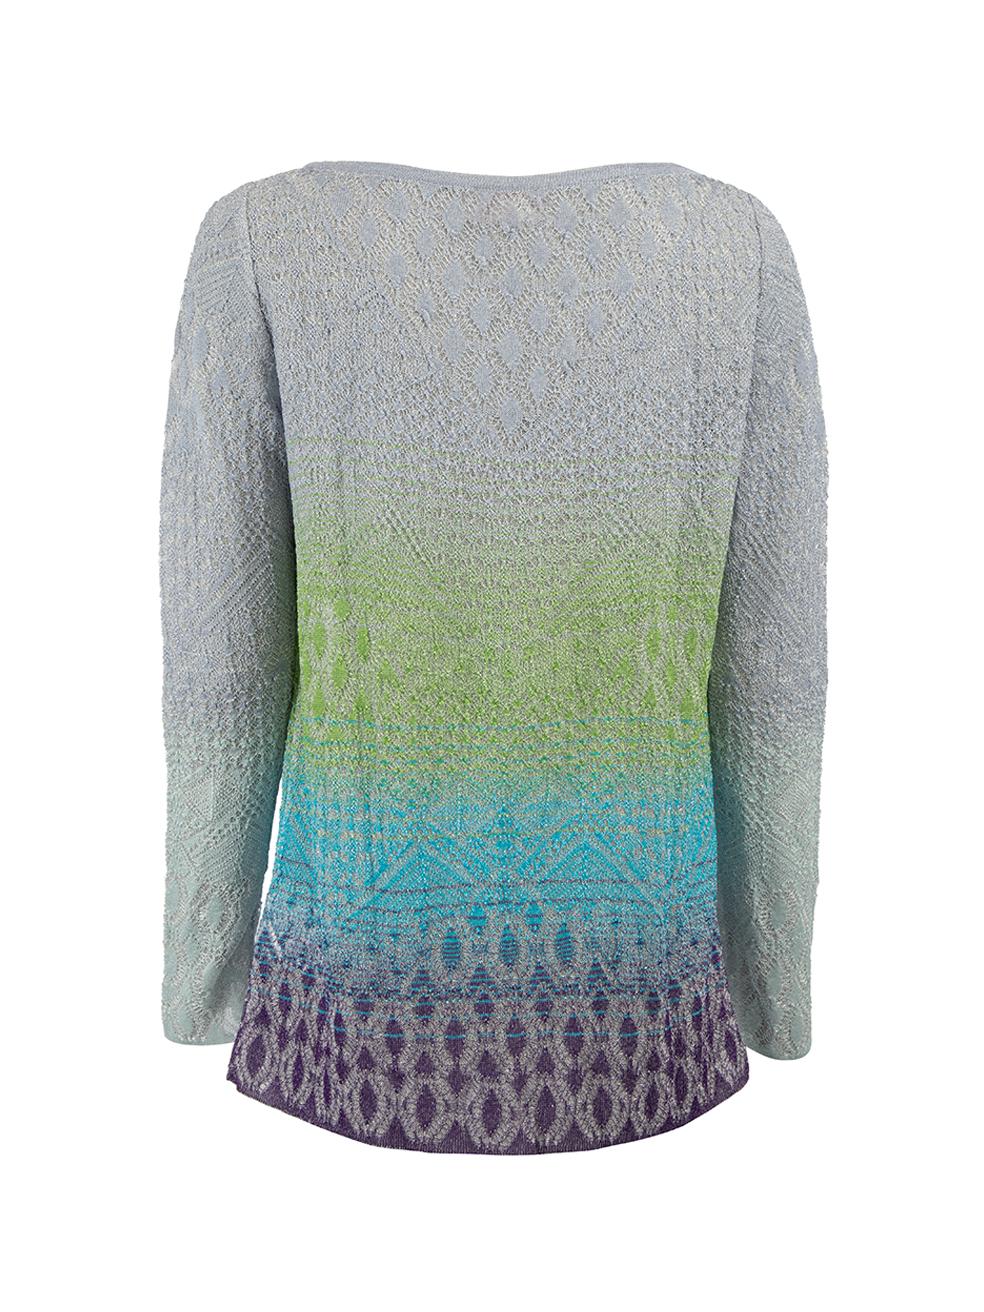 Gradient Long Sleeve Top with Shimmer Details Size XL In Good Condition For Sale In London, GB